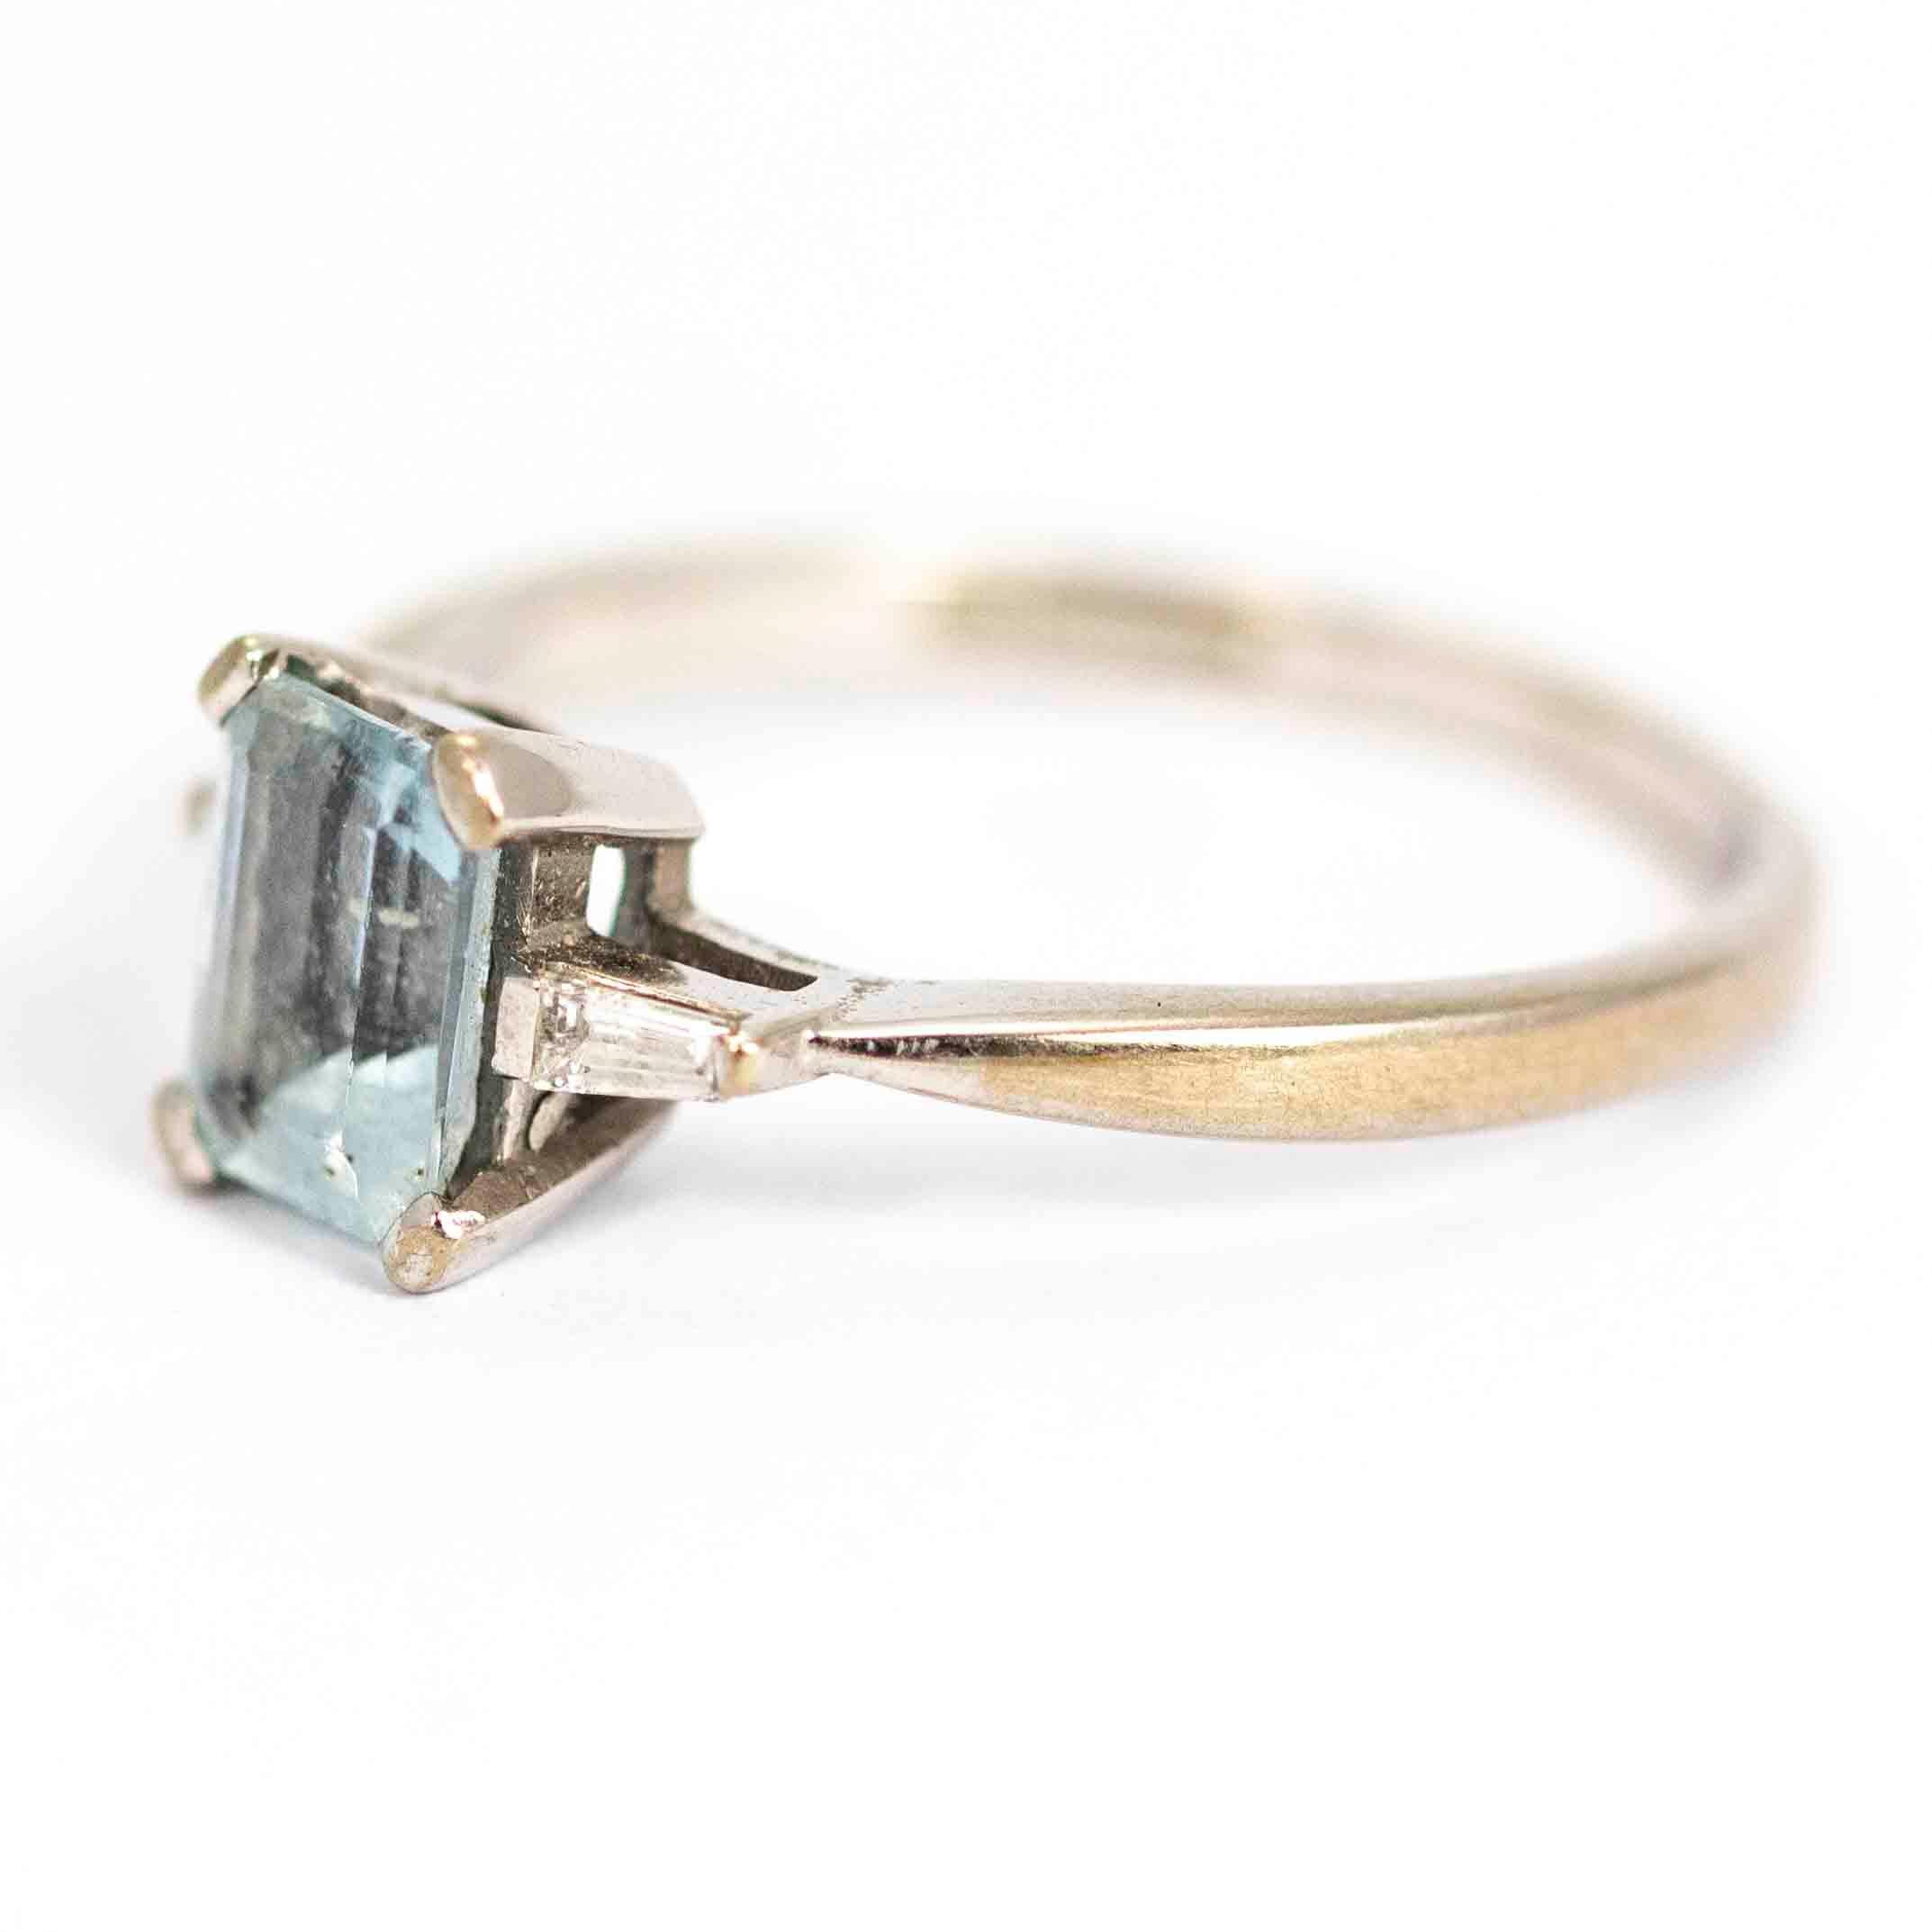 An exquisite vintage ring centrally set with a stunning emerald cut aquamarine measuring approximately 1 carat. Elegantly flanking the aquamarine are two beautiful baguette cut diamonds. Modelled in 18 carat yellow gold. Hallmarked Birmingham,